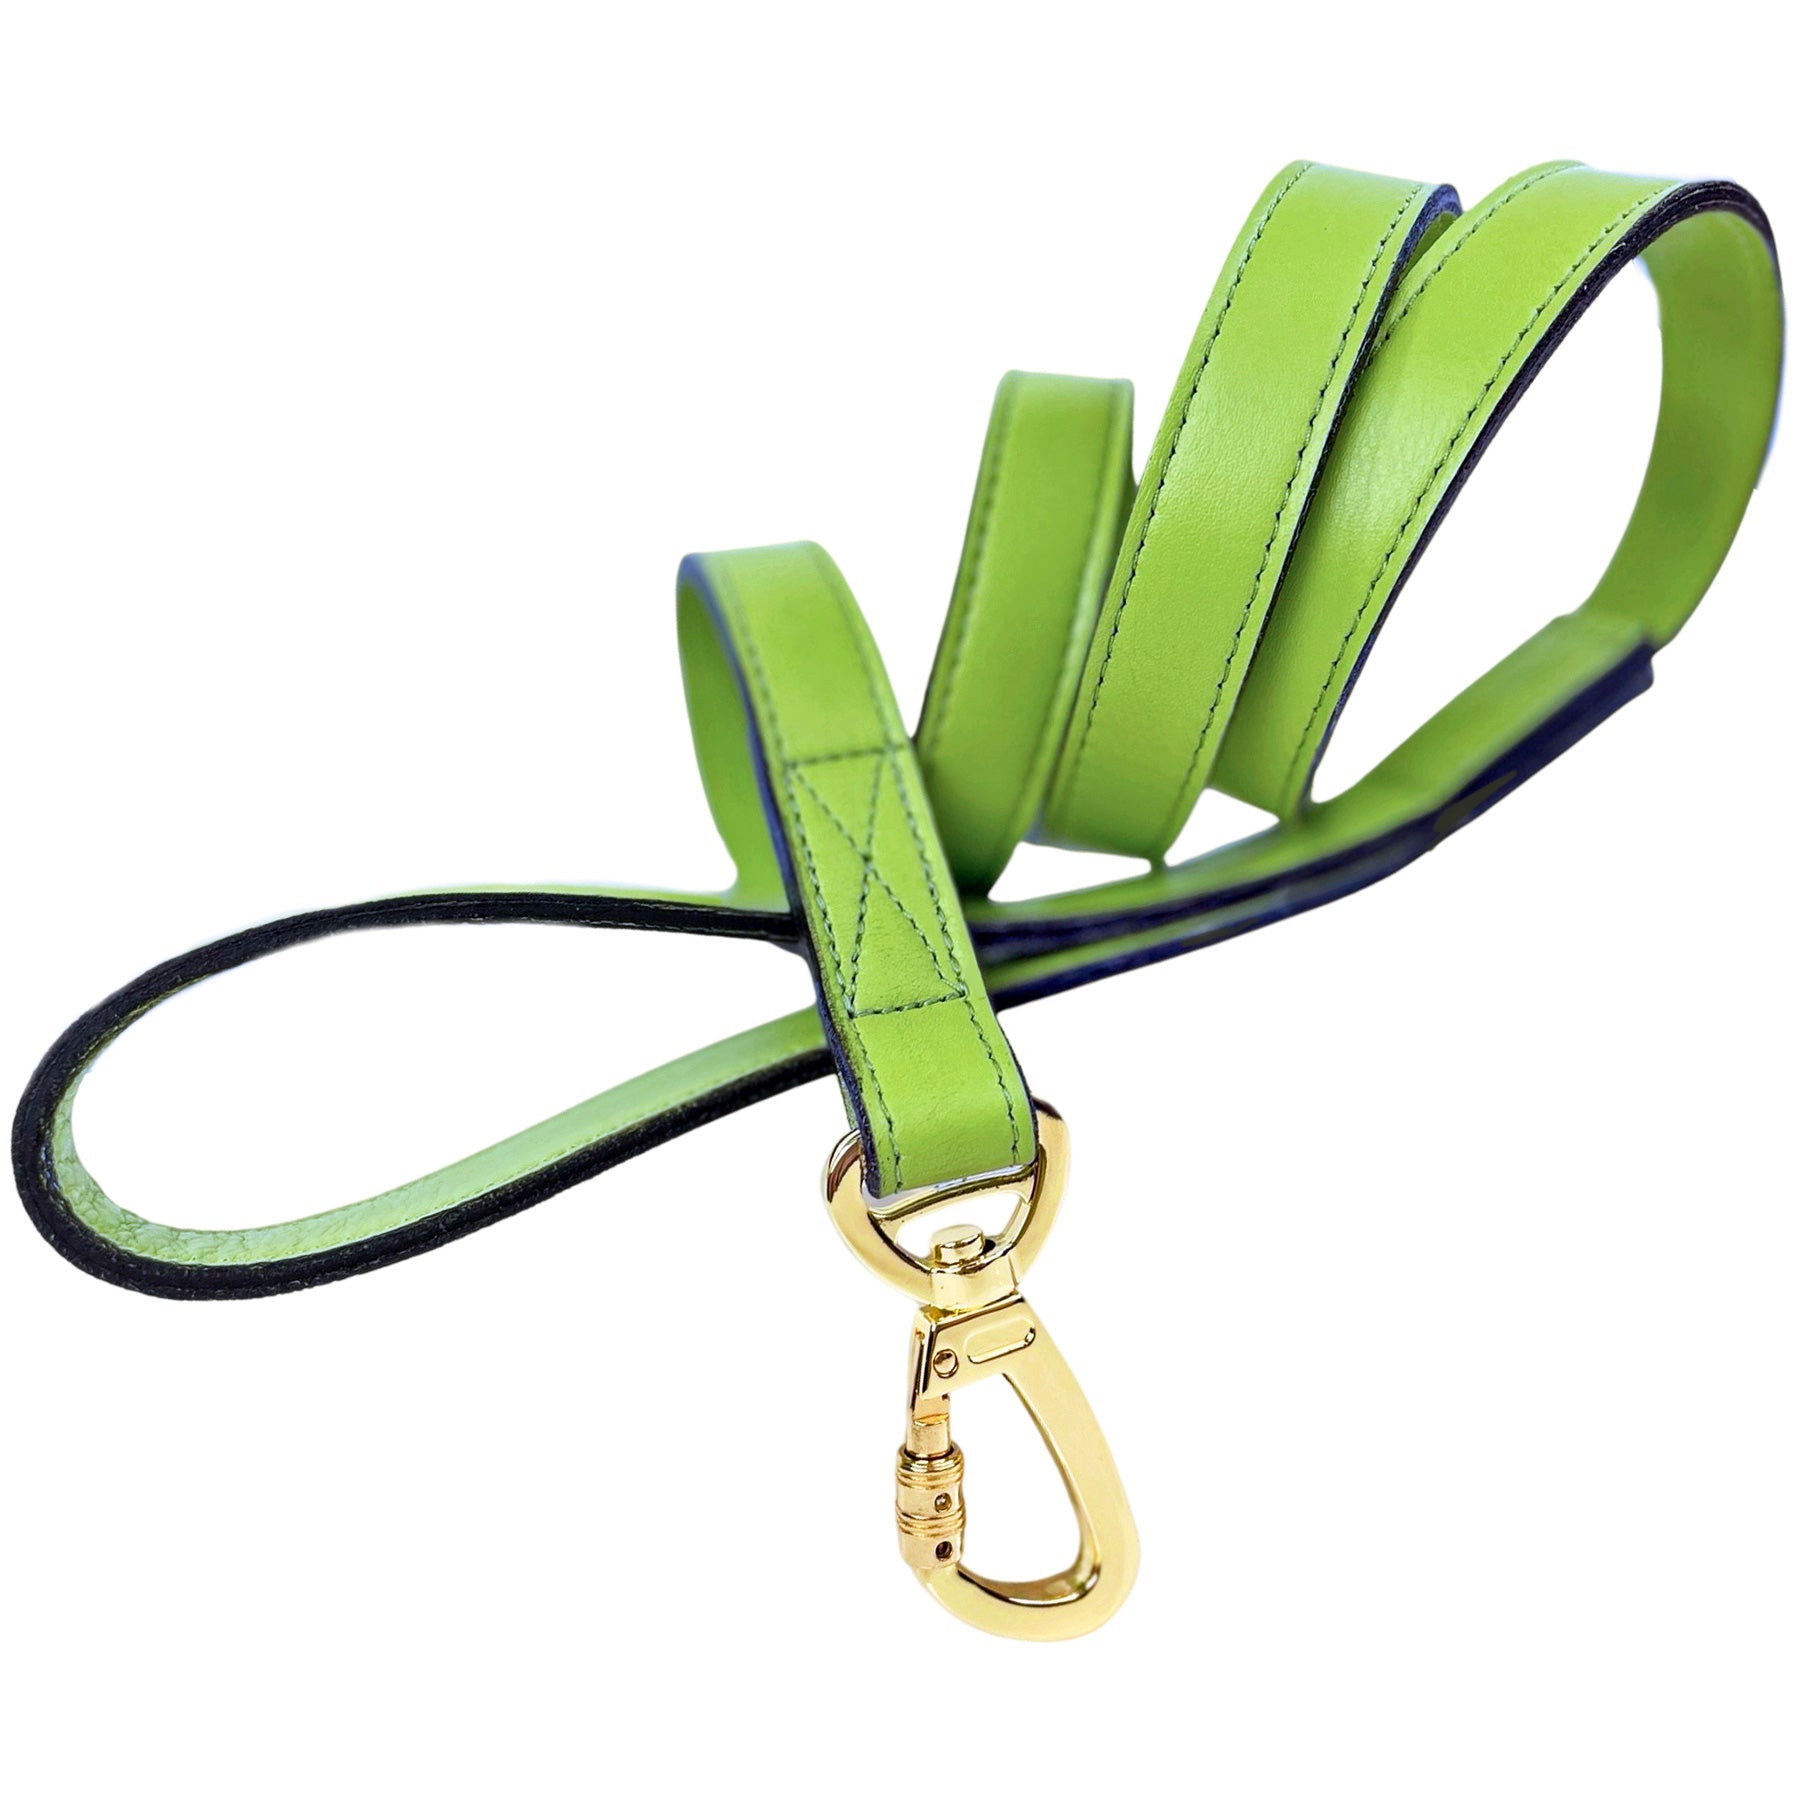 Daisy Dog Leash in Lime Green & Gold